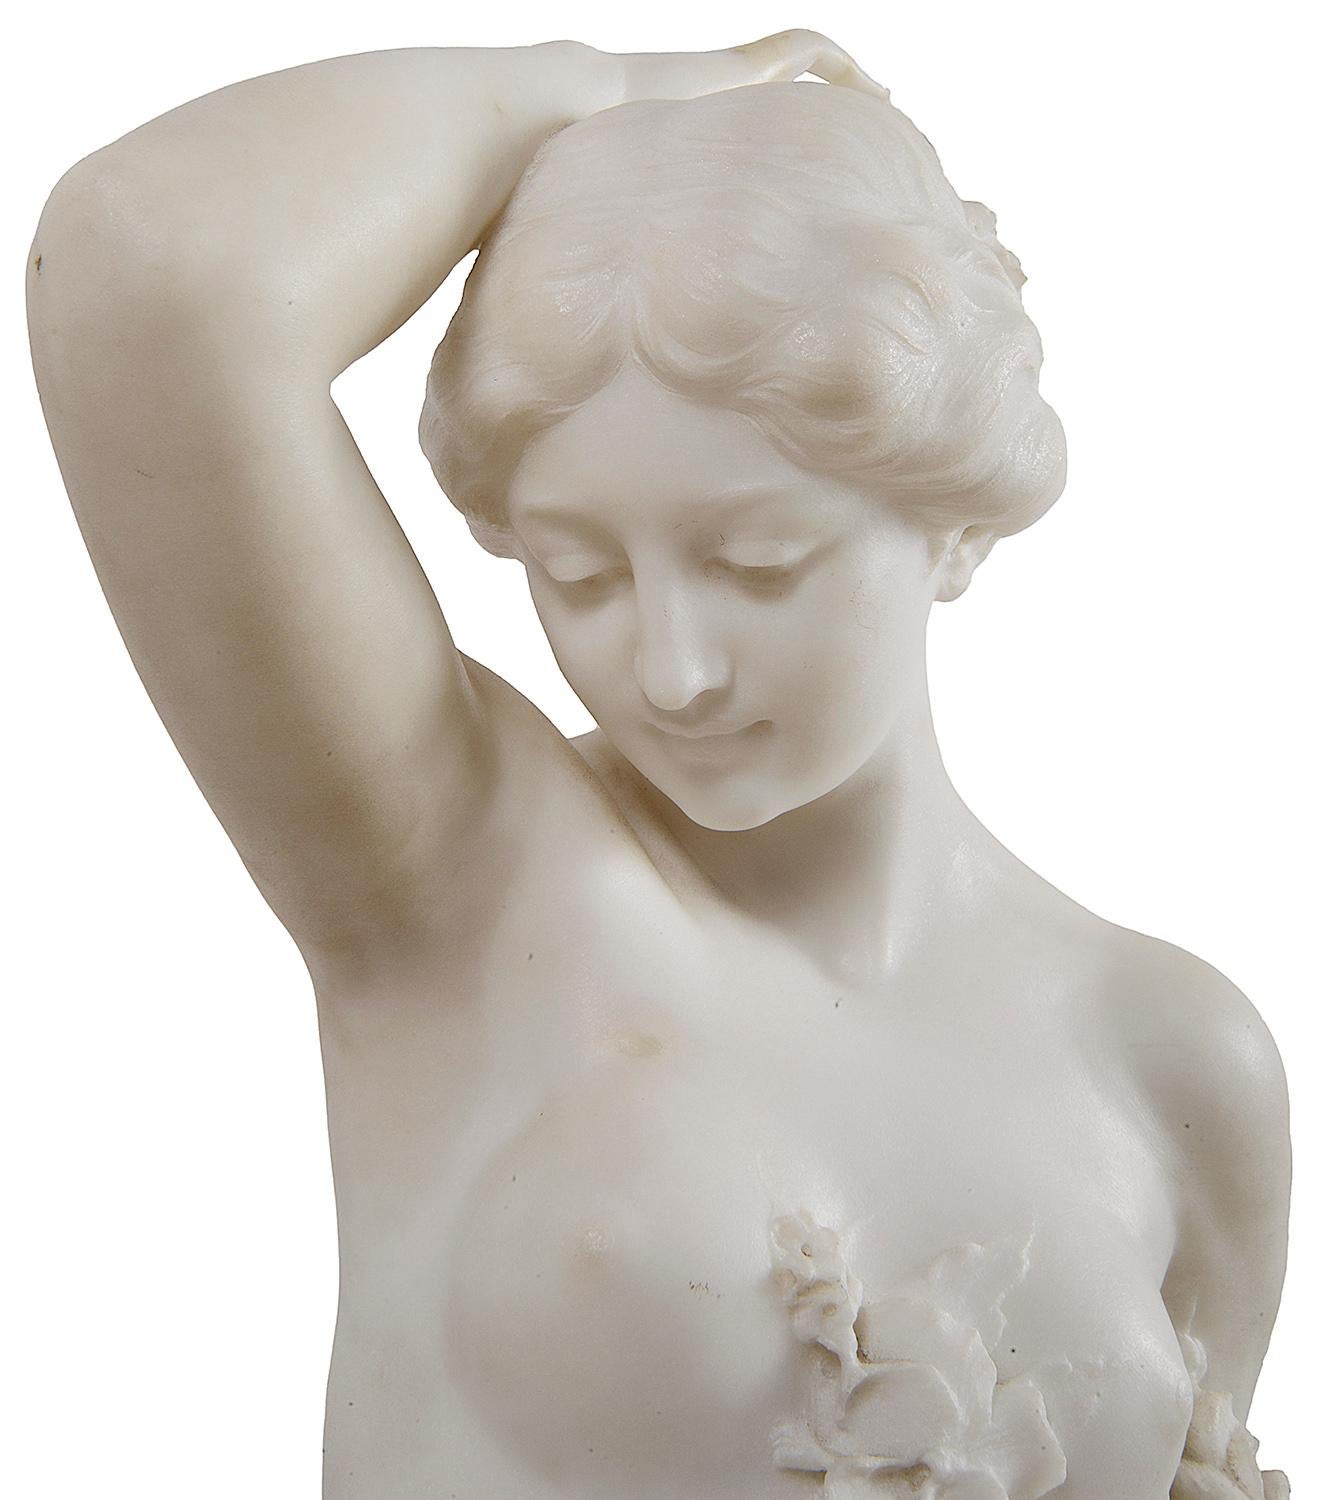 Hand-Carved 19th Century Carrera Marble Statue of a Nymph, 'Bazzanti'